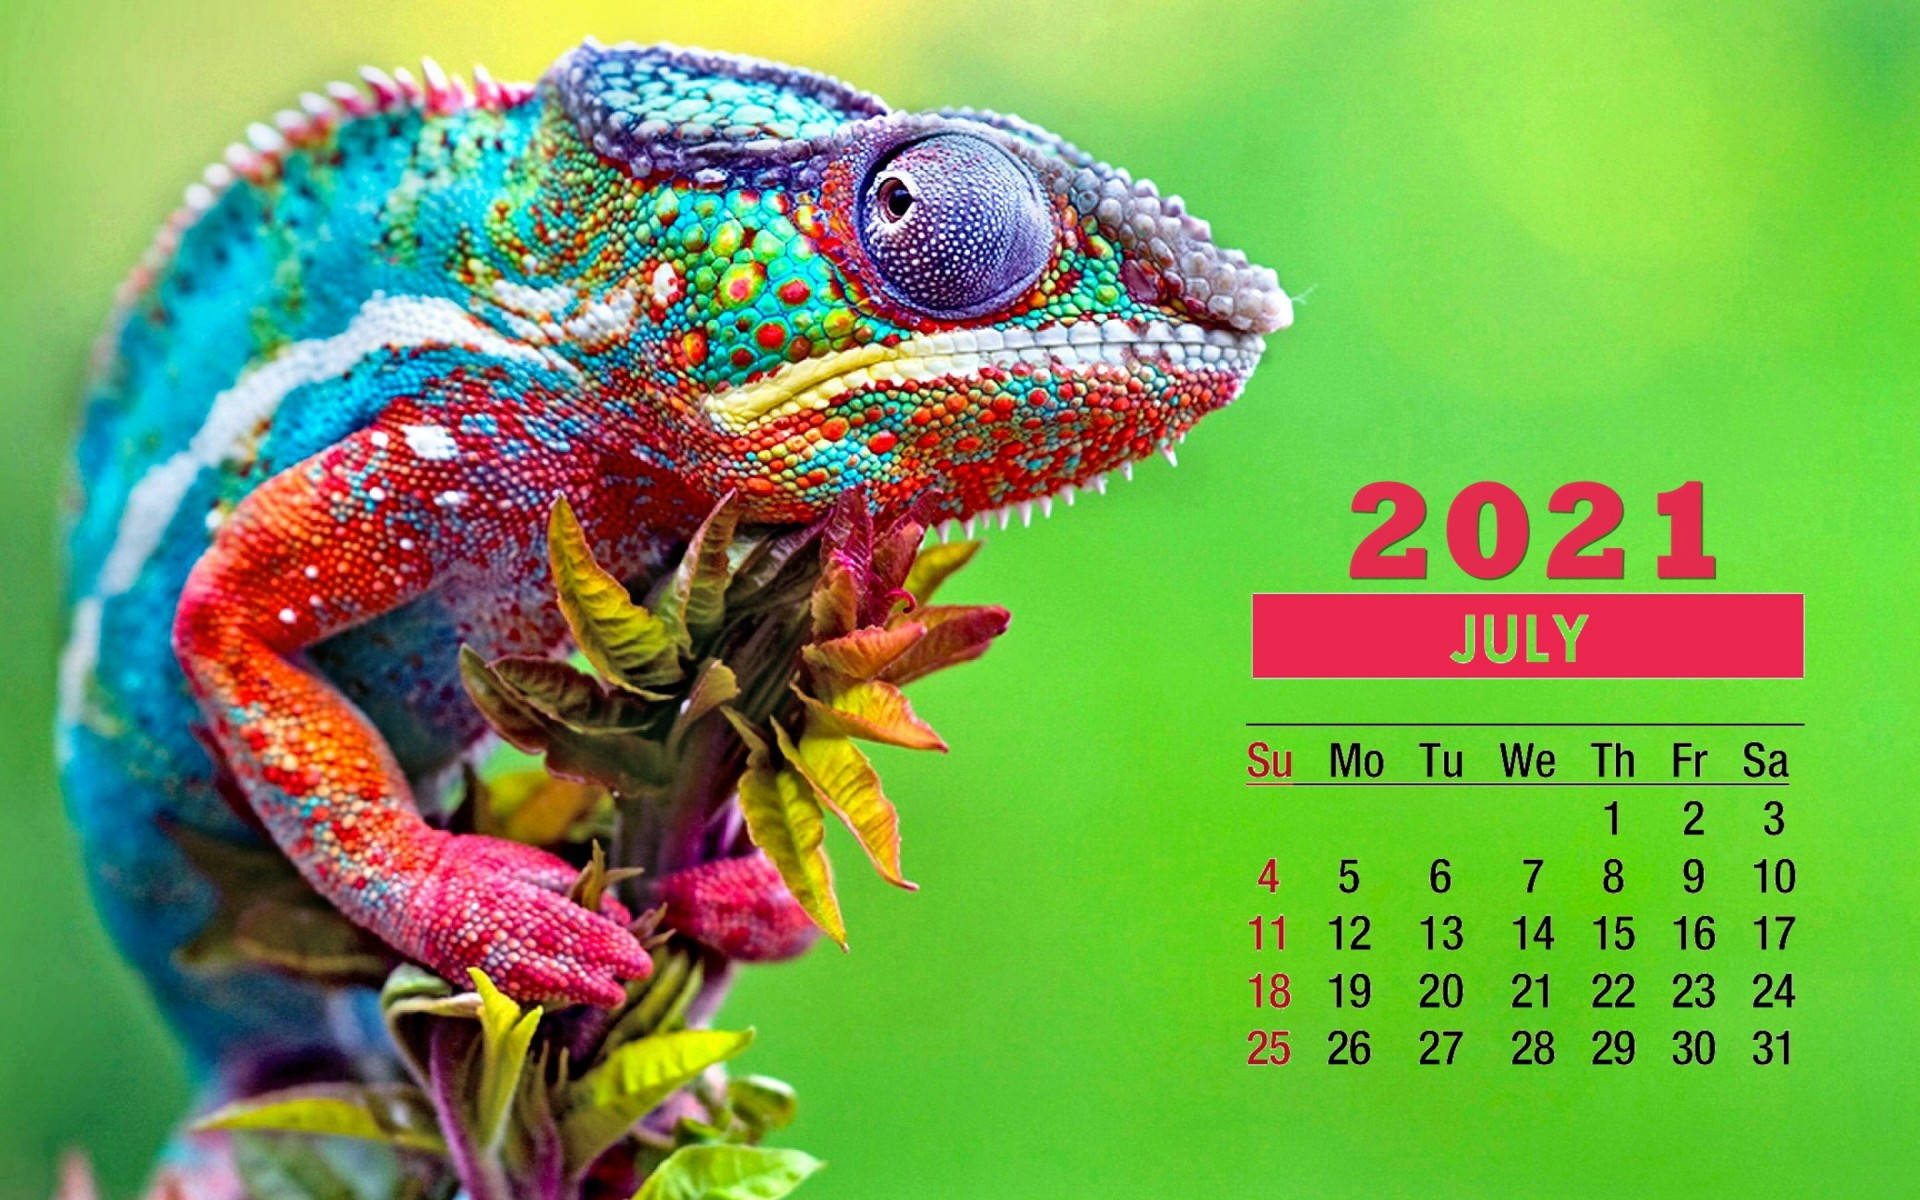 Welcome To July With The Colorful Chameleon 2021 Calendar!